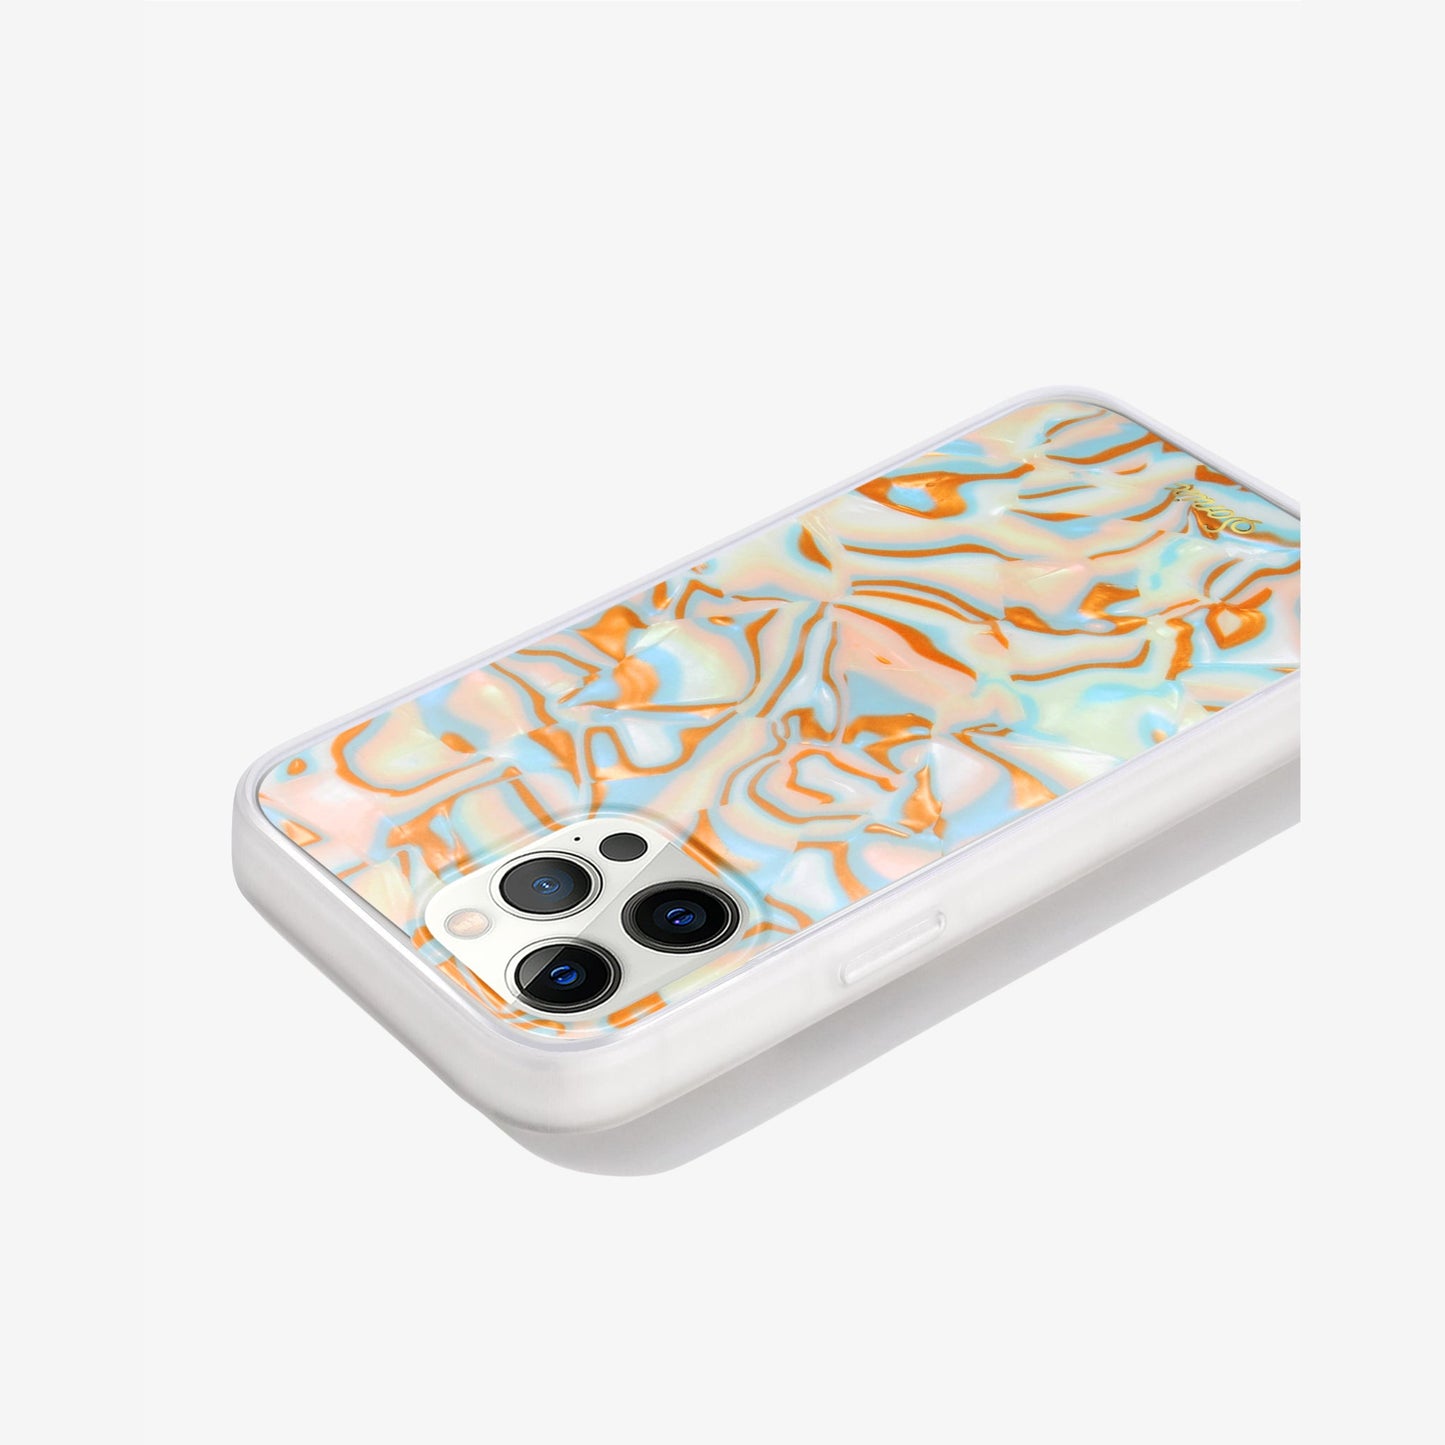 metallic oranges, blues, and cream colors in a wavy 70's pattern shown on an iphone 13 side view